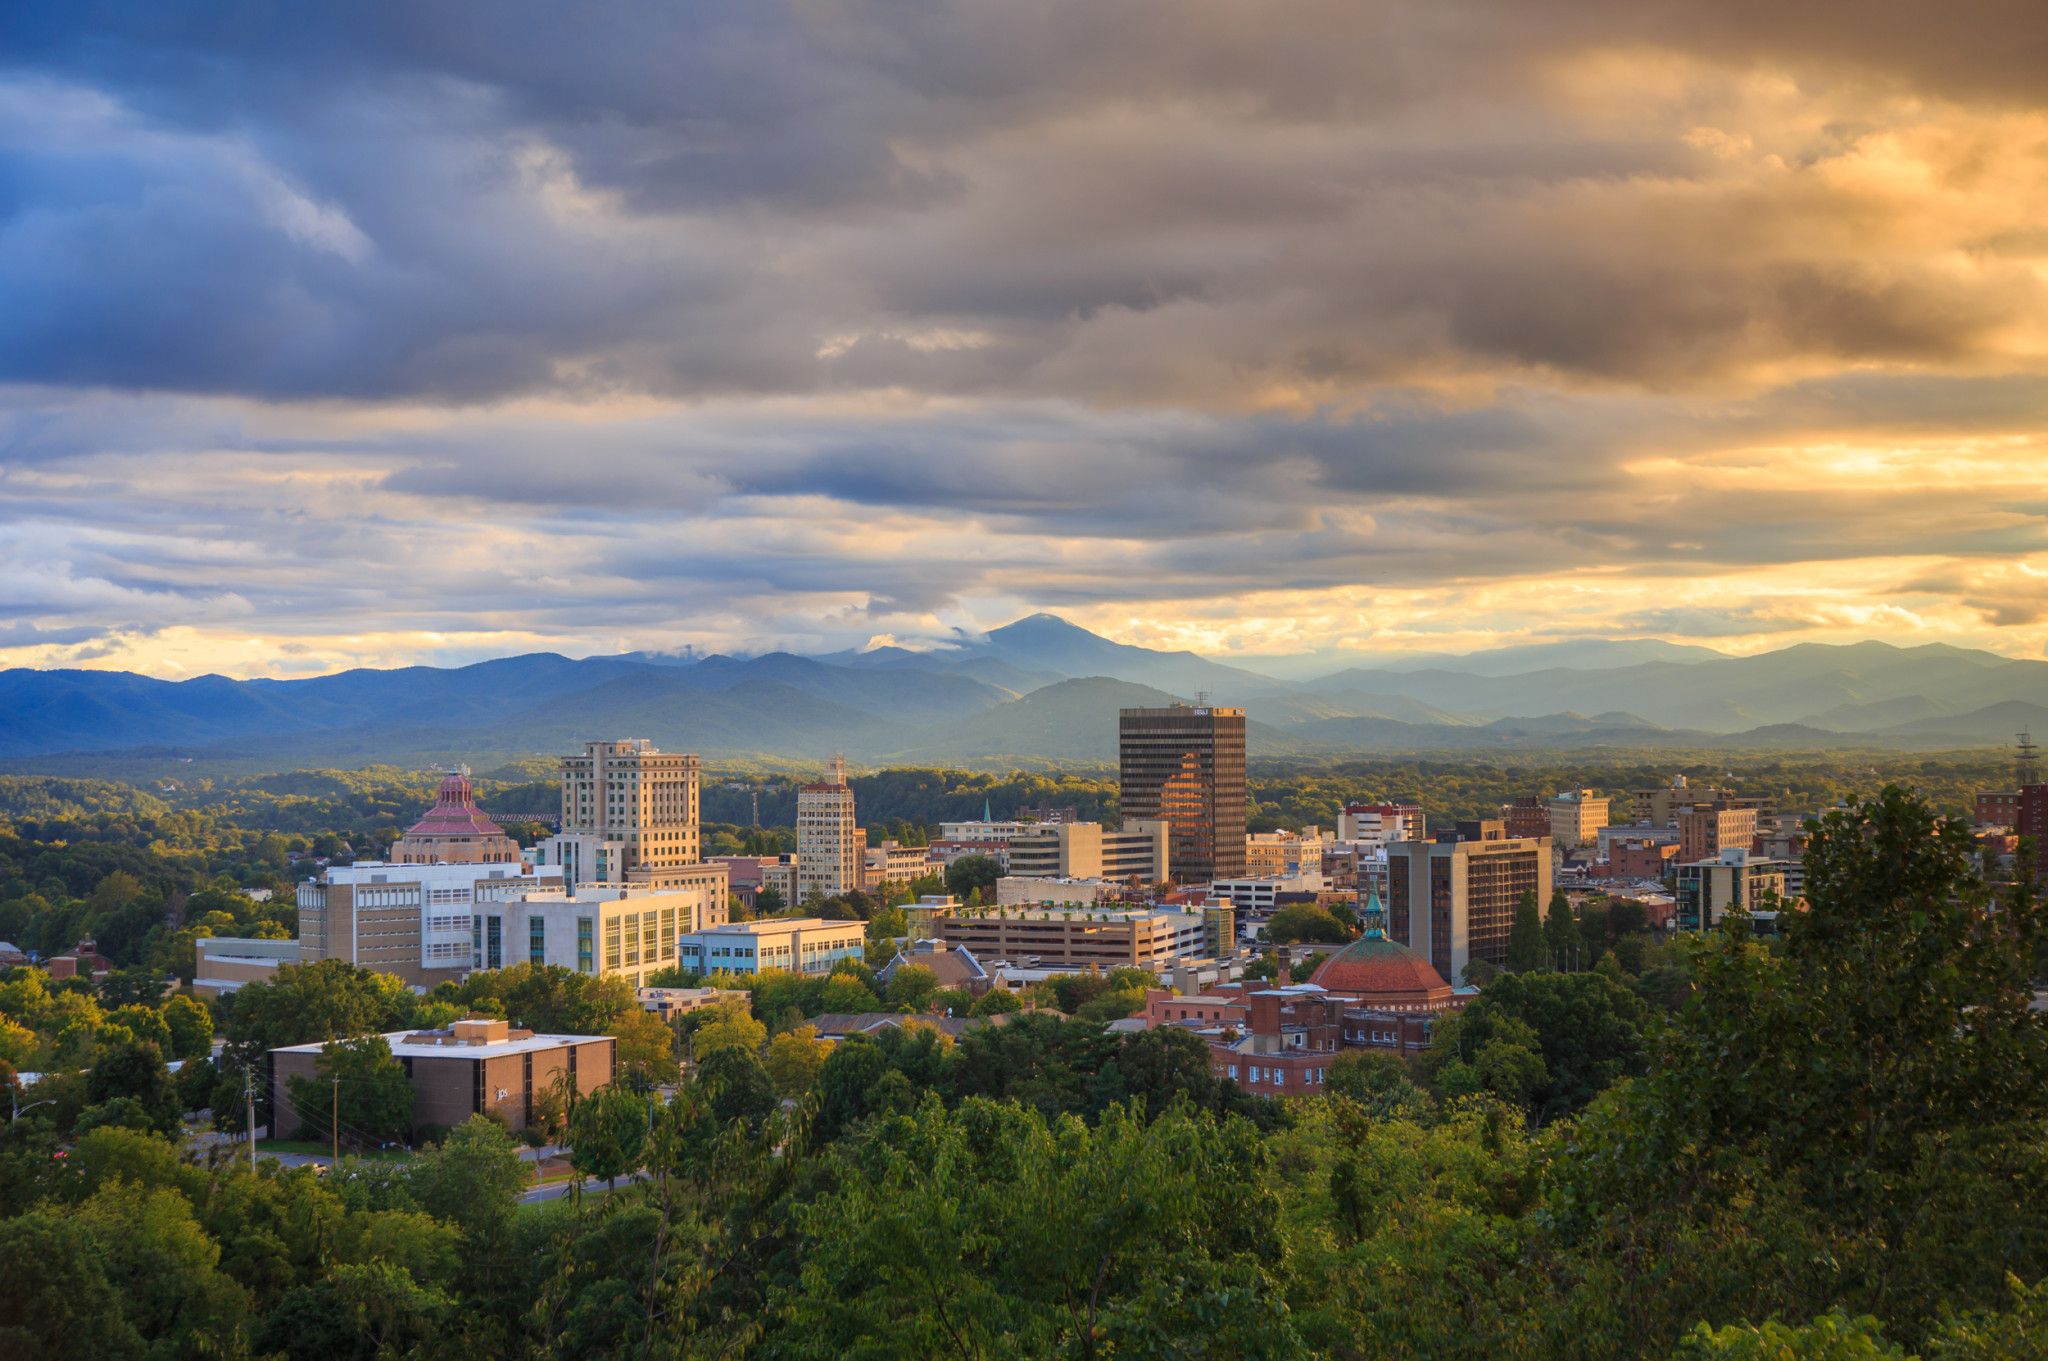 Explore things to do in Asheville, North Carolina!